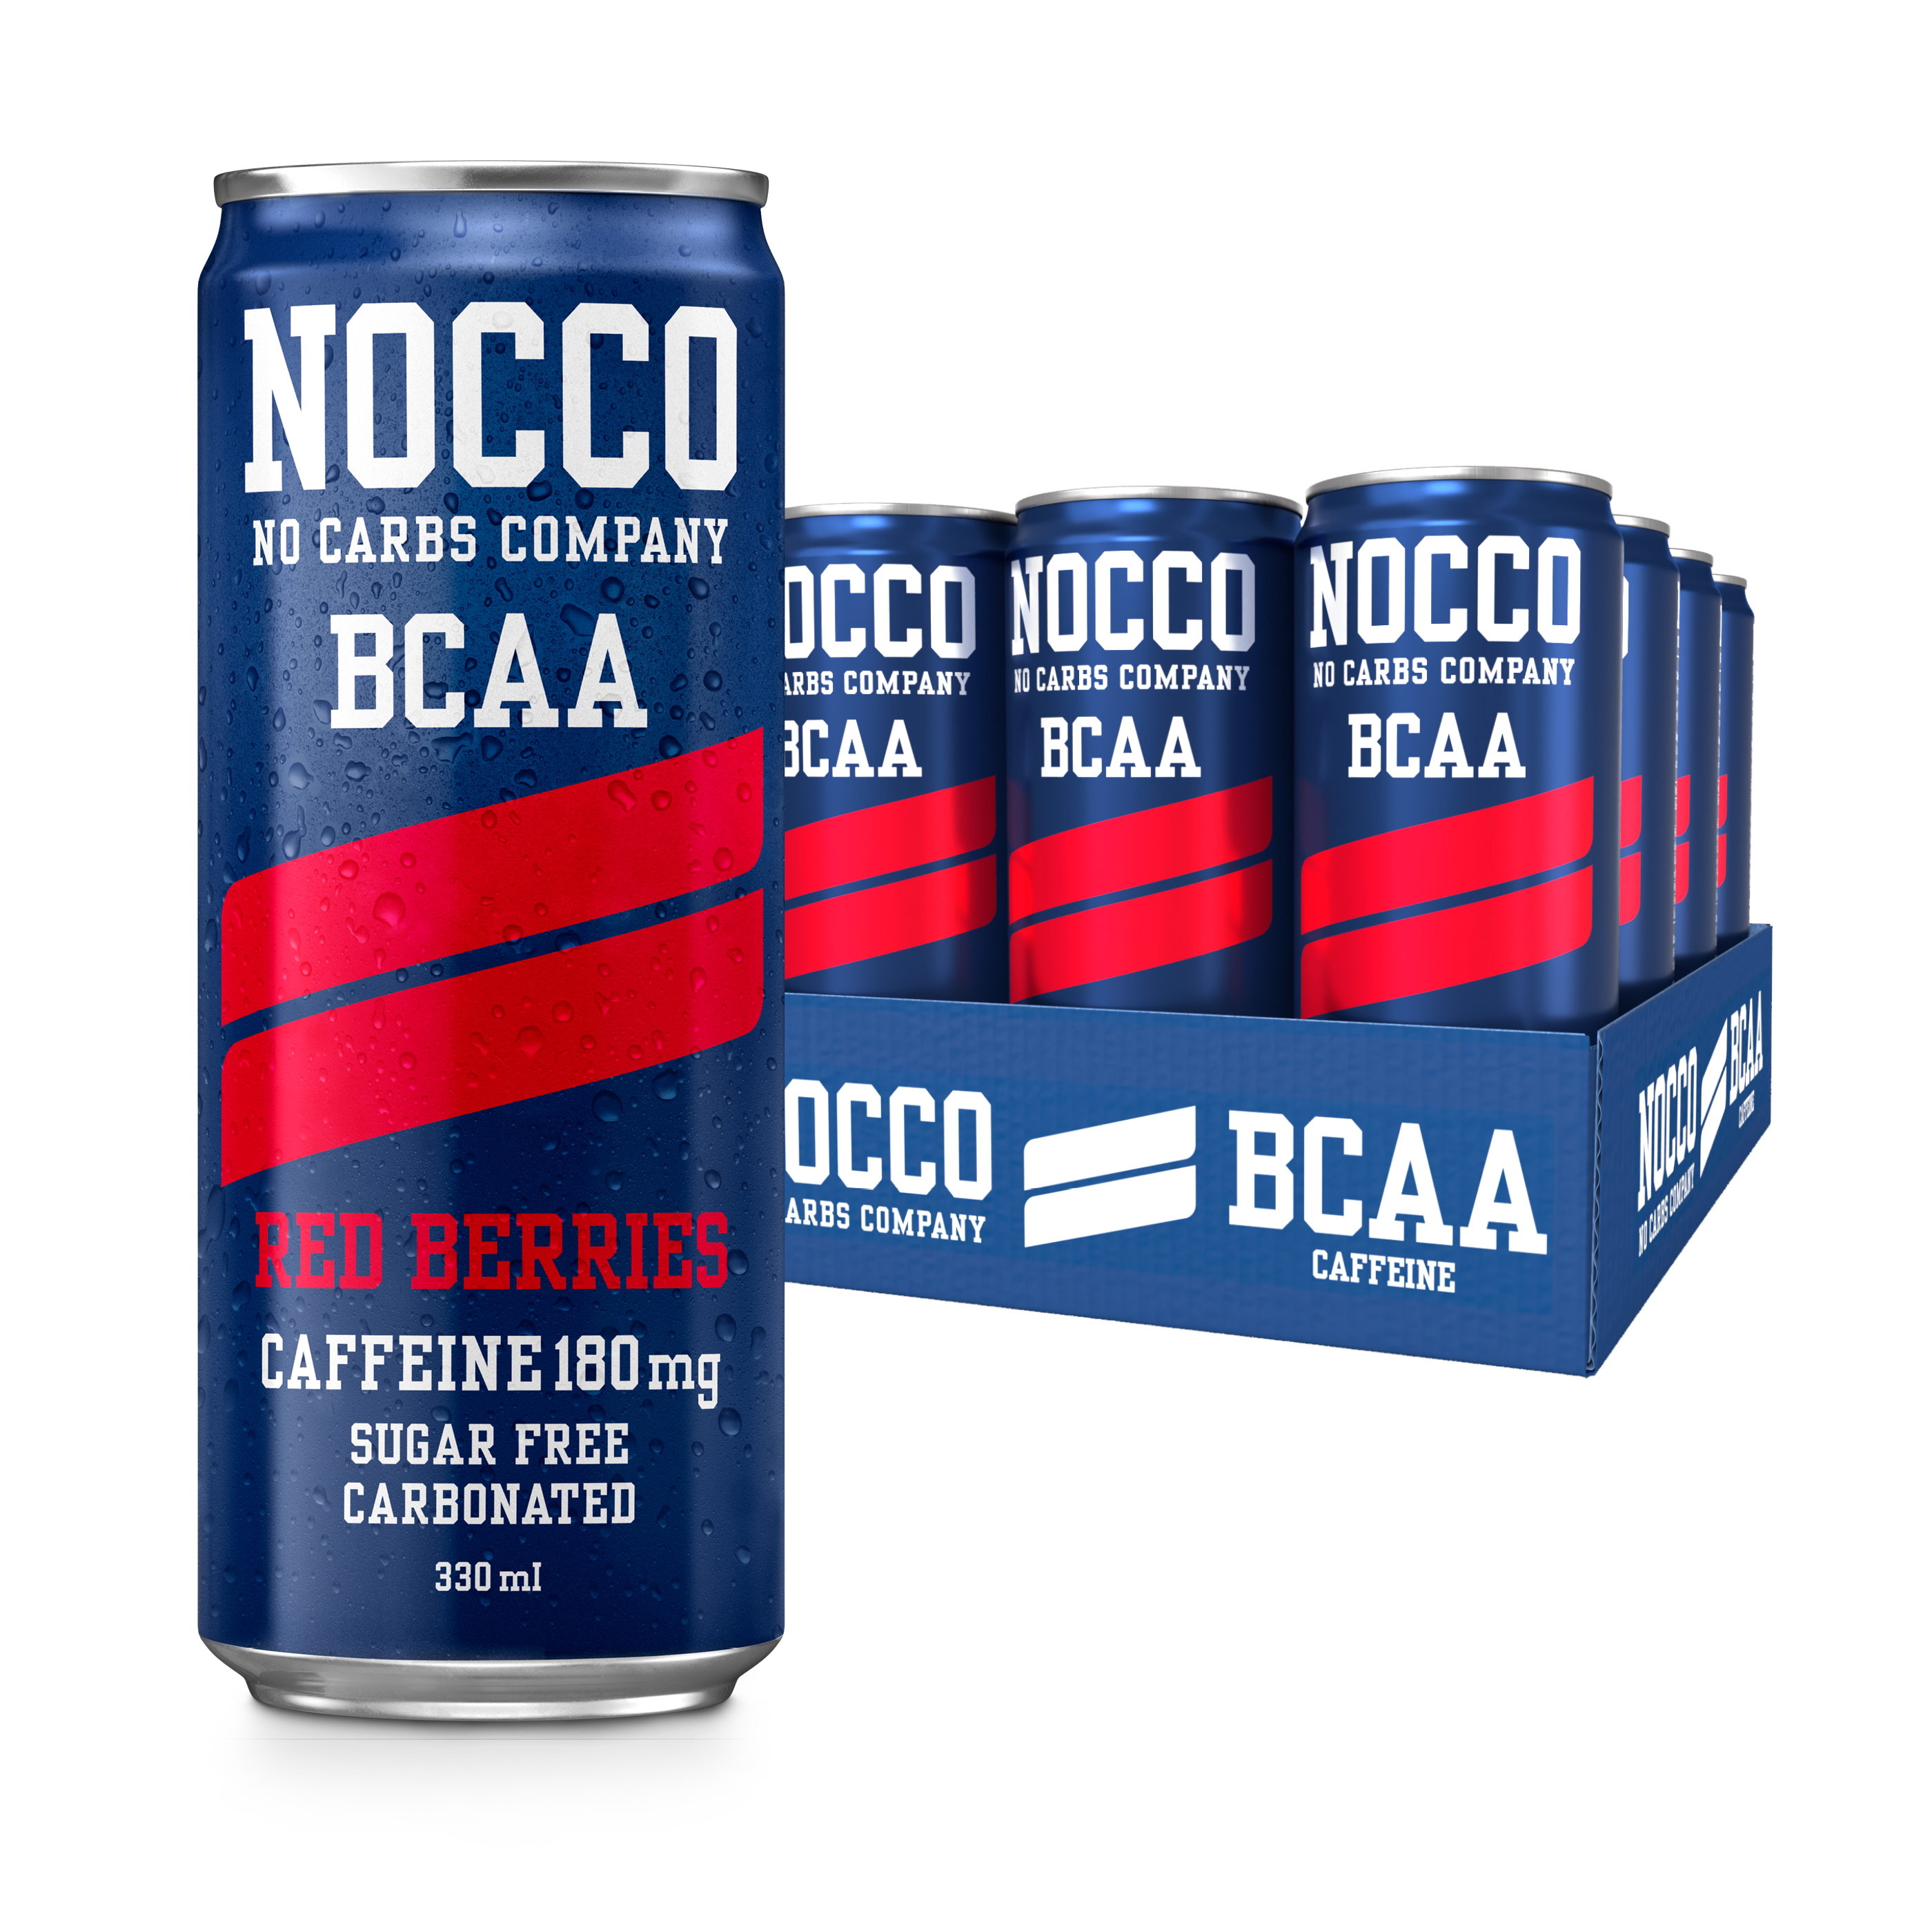 NOCCO Red Berries 12-pack